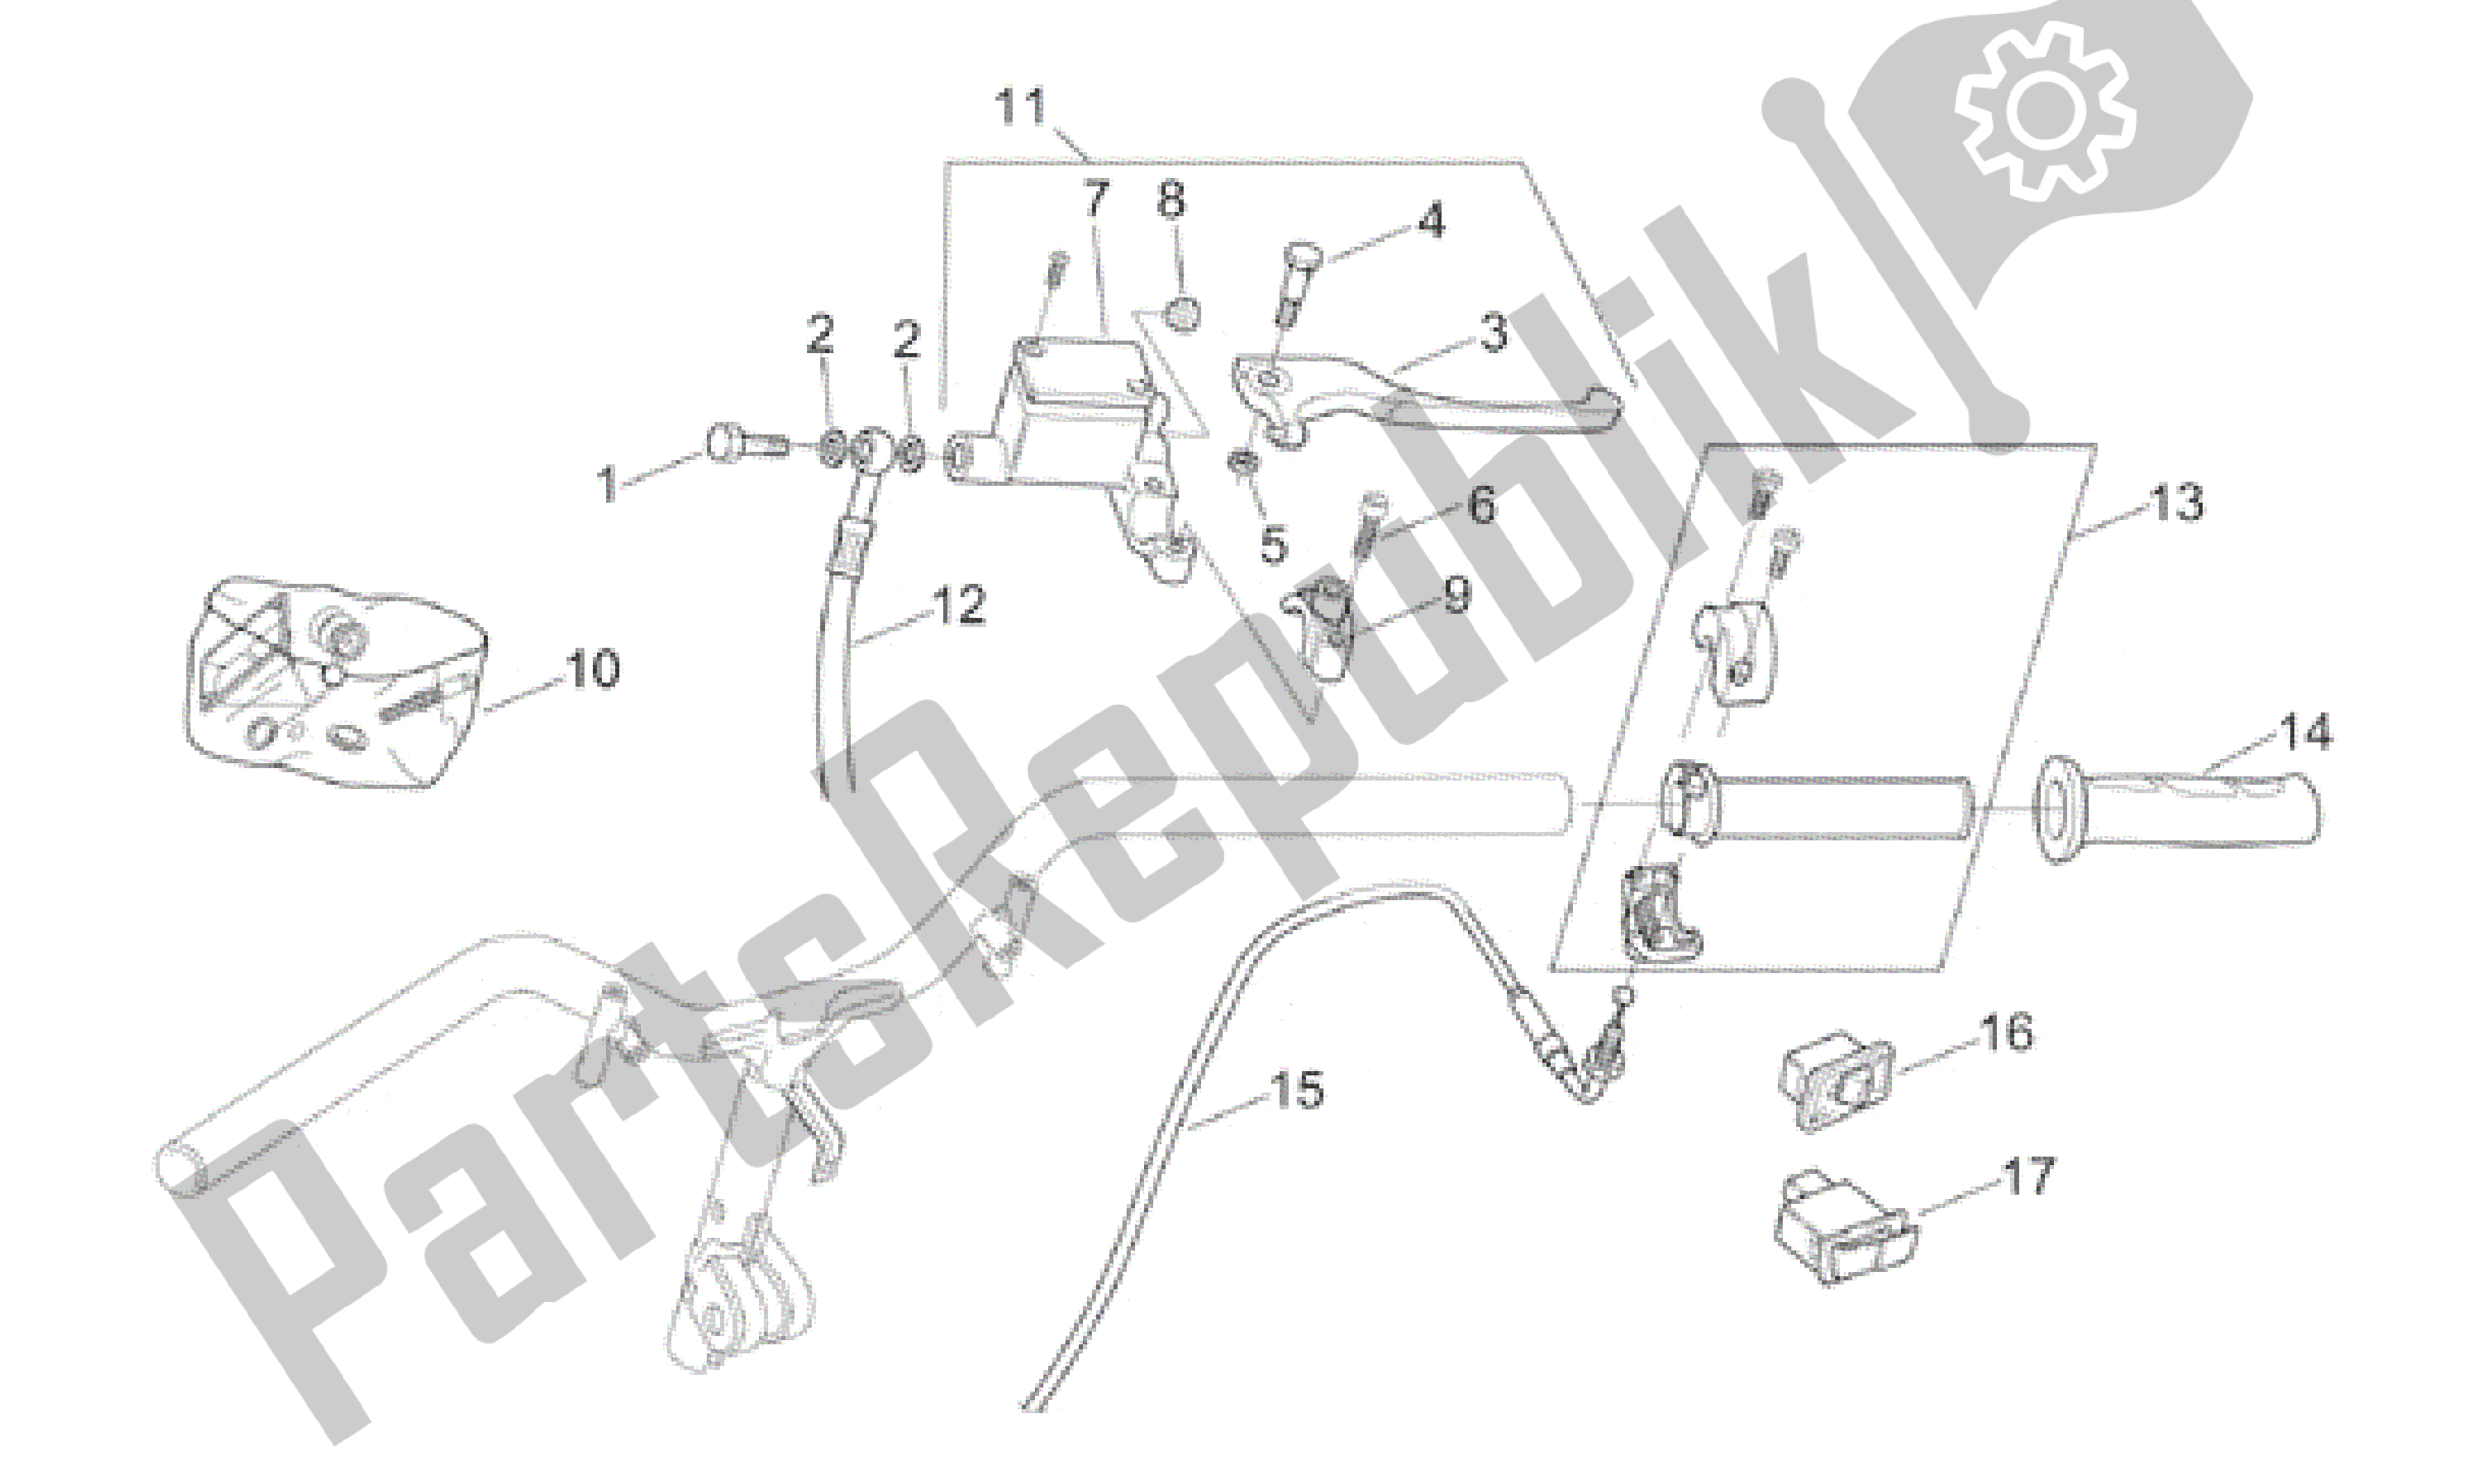 All parts for the Rh Controls of the Aprilia Sonic 50 1998 - 2001